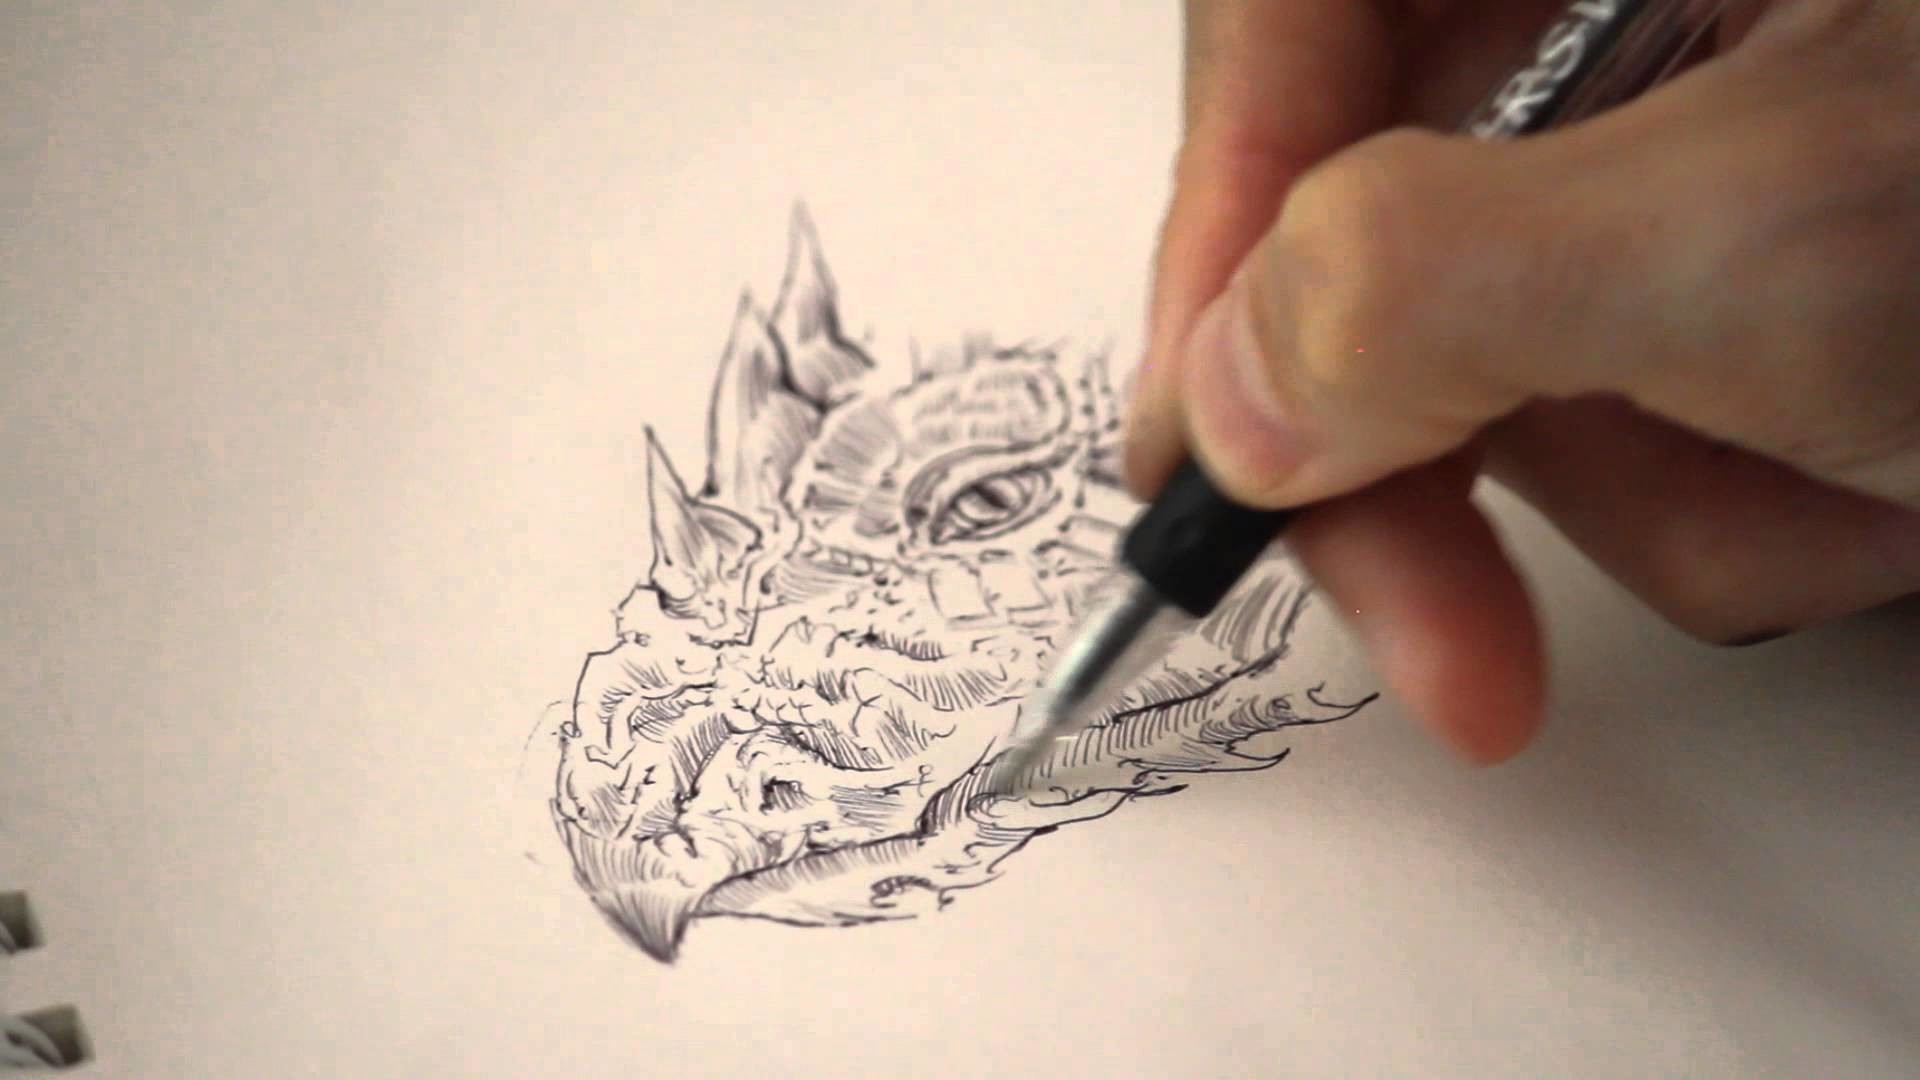 1920x1080 Drawing a Dragon Head in Pen & Ink - Time Lapse